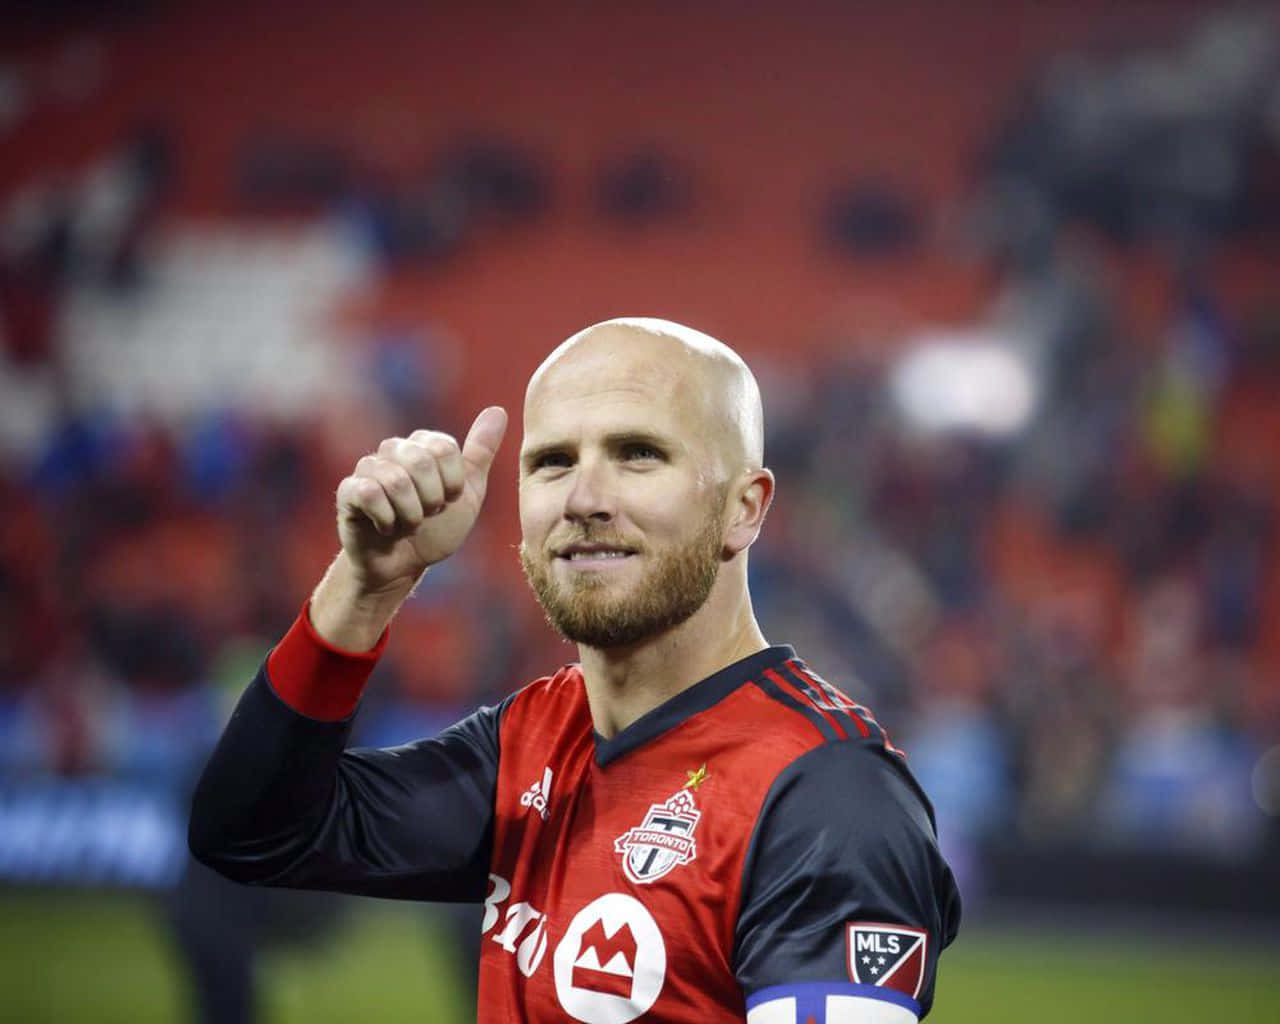 Michael Bradley Thumbs Up To The Crowd Wallpaper